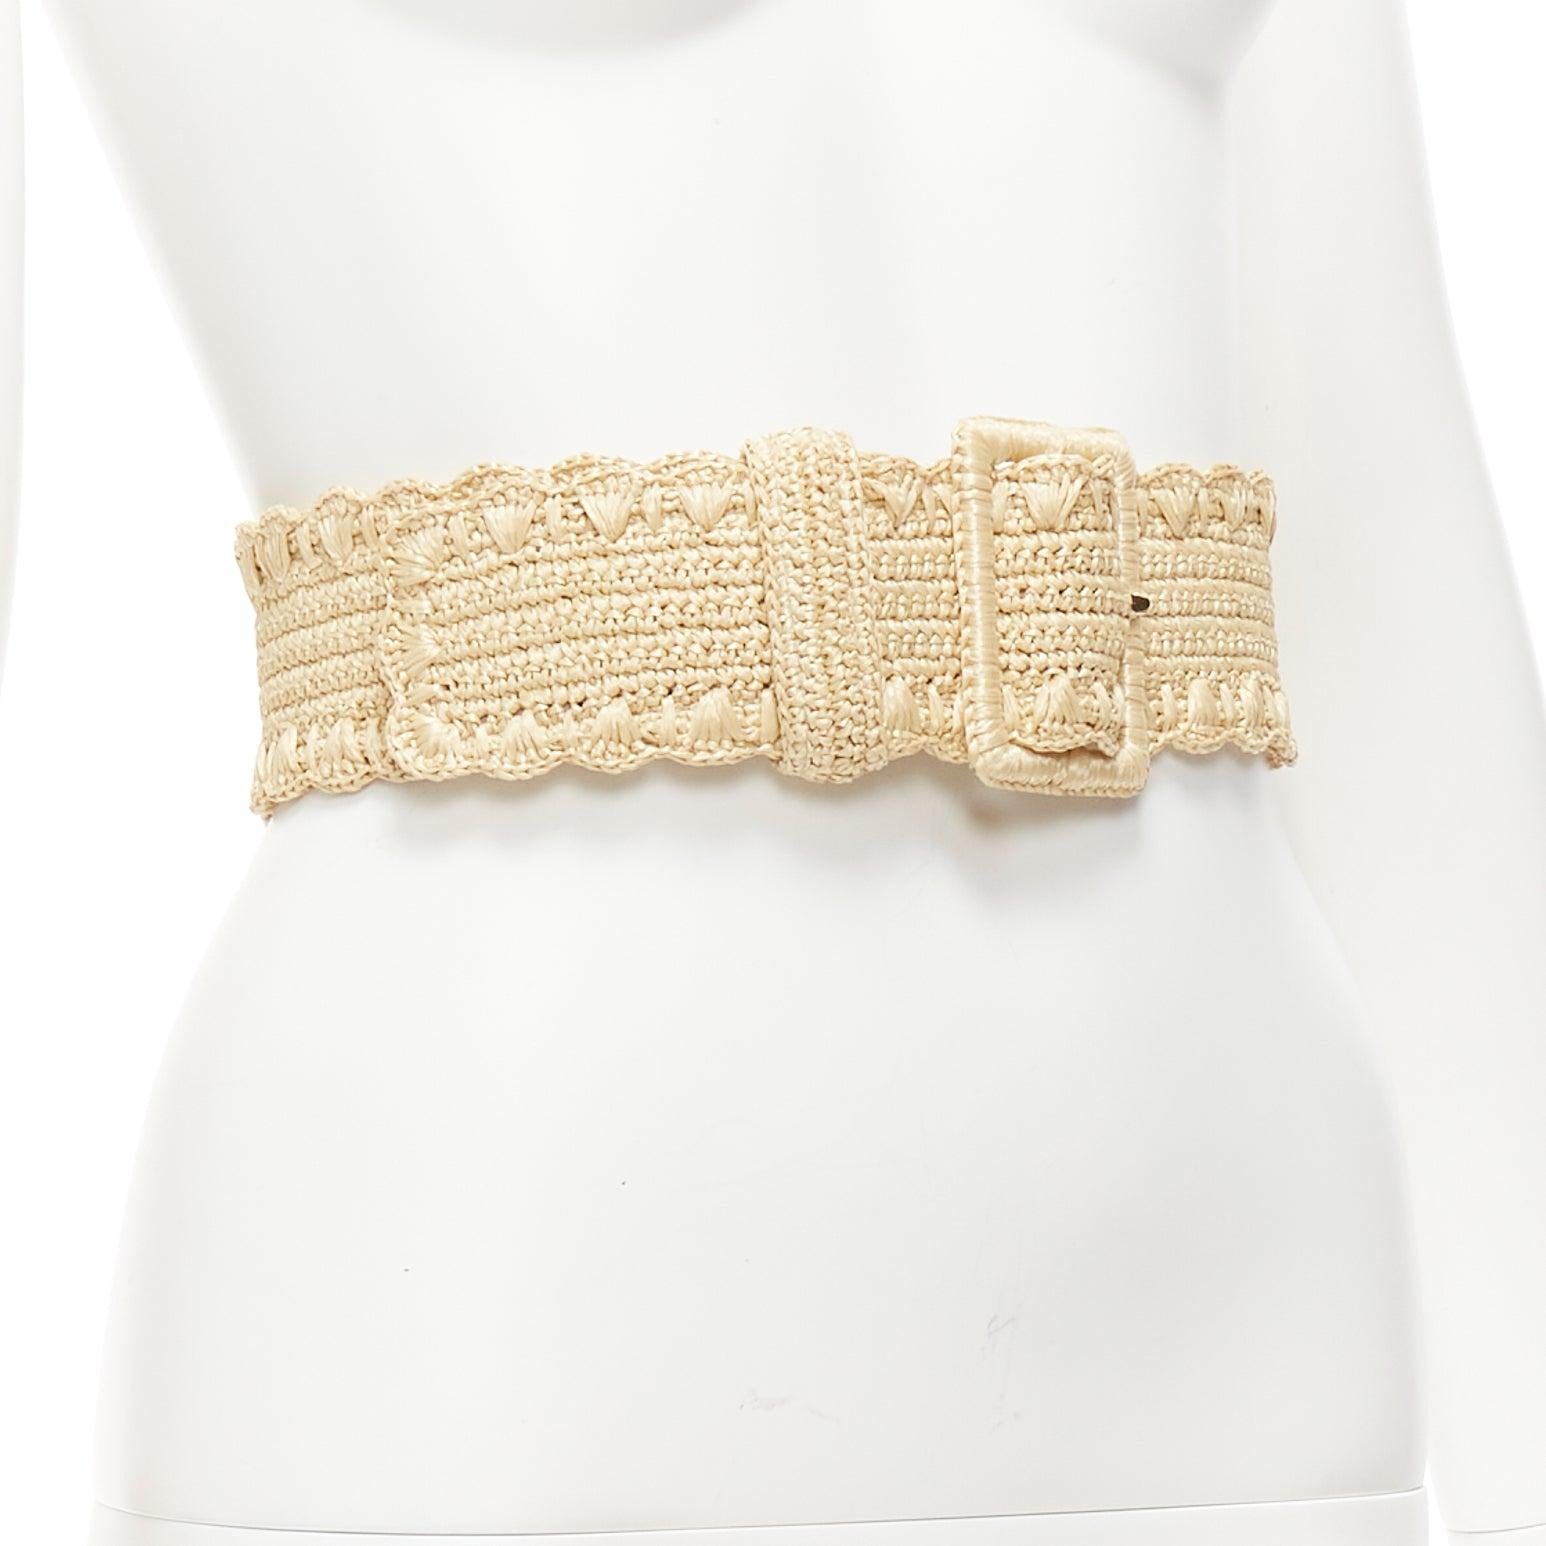 DOLCE GABBANA beige raffia nude leather lining wide belt 90cm
Reference: AAWC/A01203
Brand: Dolce Gabbana
Designer: Domenico Dolce and Stefano Gabbana
Material: Raffia, Leather
Color: Beige, Nude
Pattern: Solid
Closure: Belt
Lining: Nude